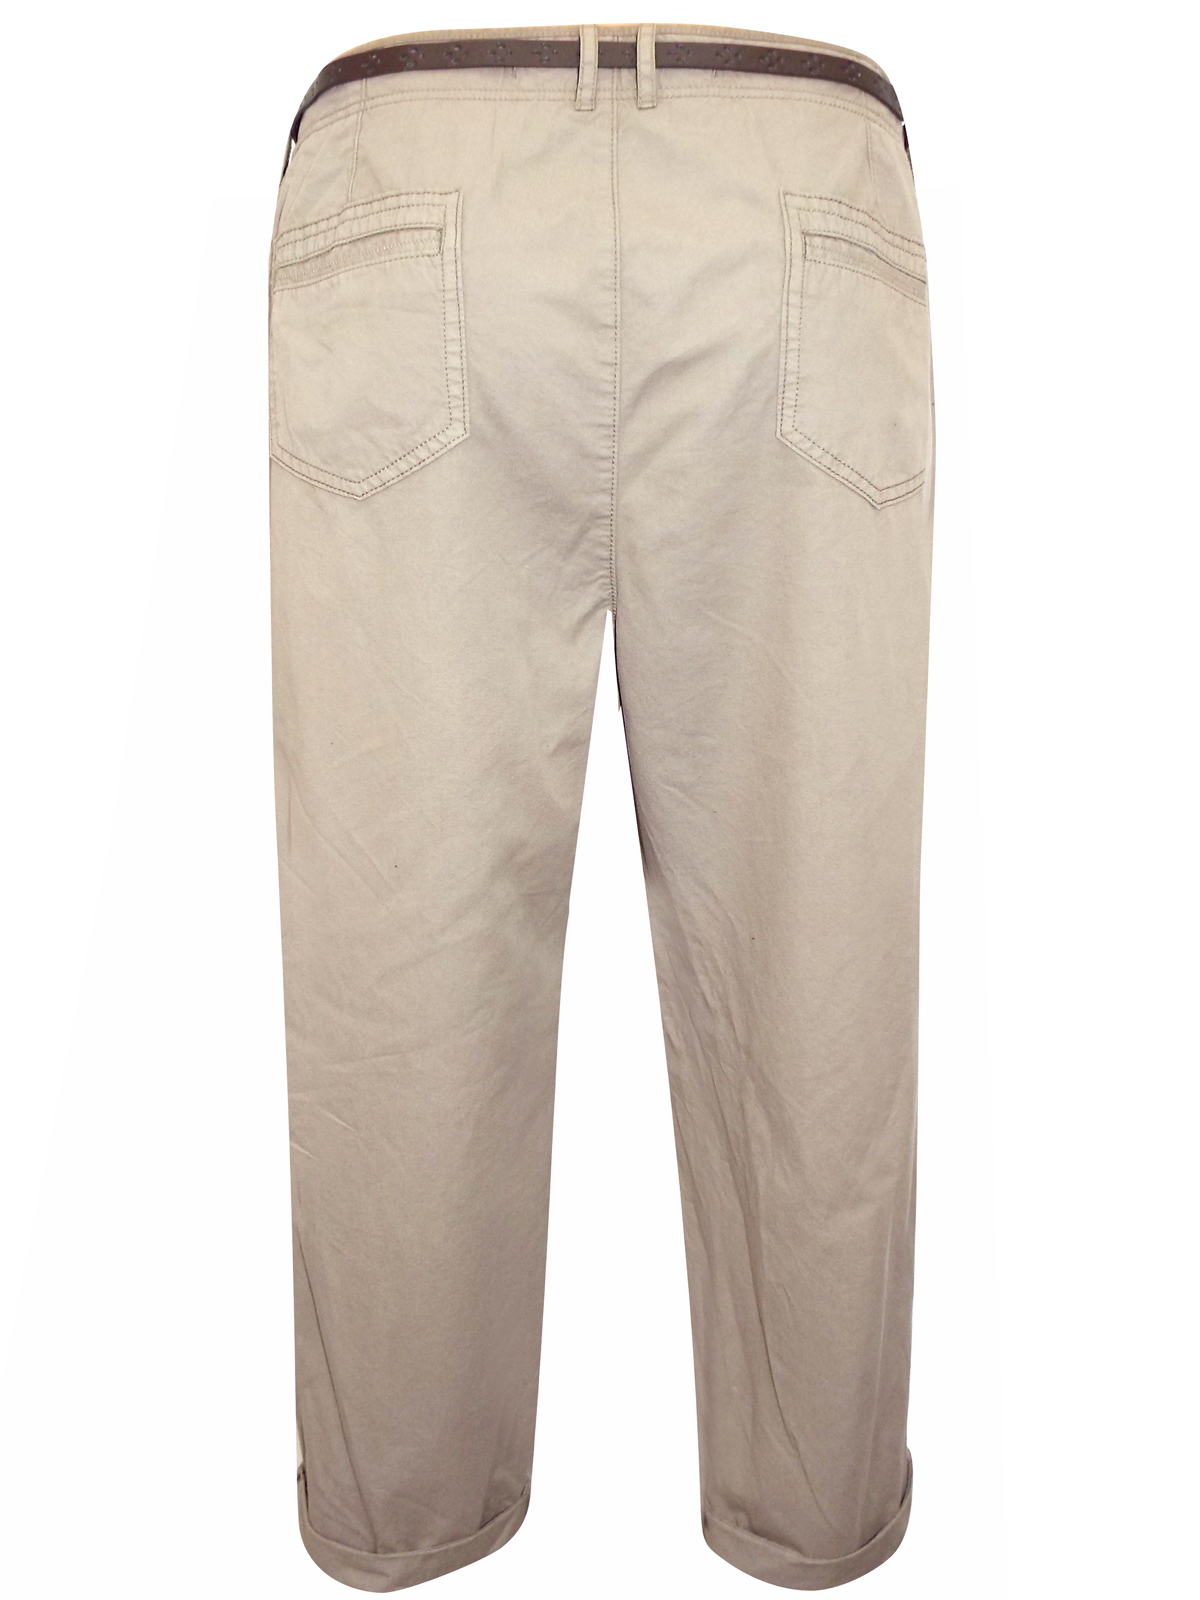 Marks and Spencer - - M&5 SABLE Pure Cotton Belted Chinos - Size 8 to 22